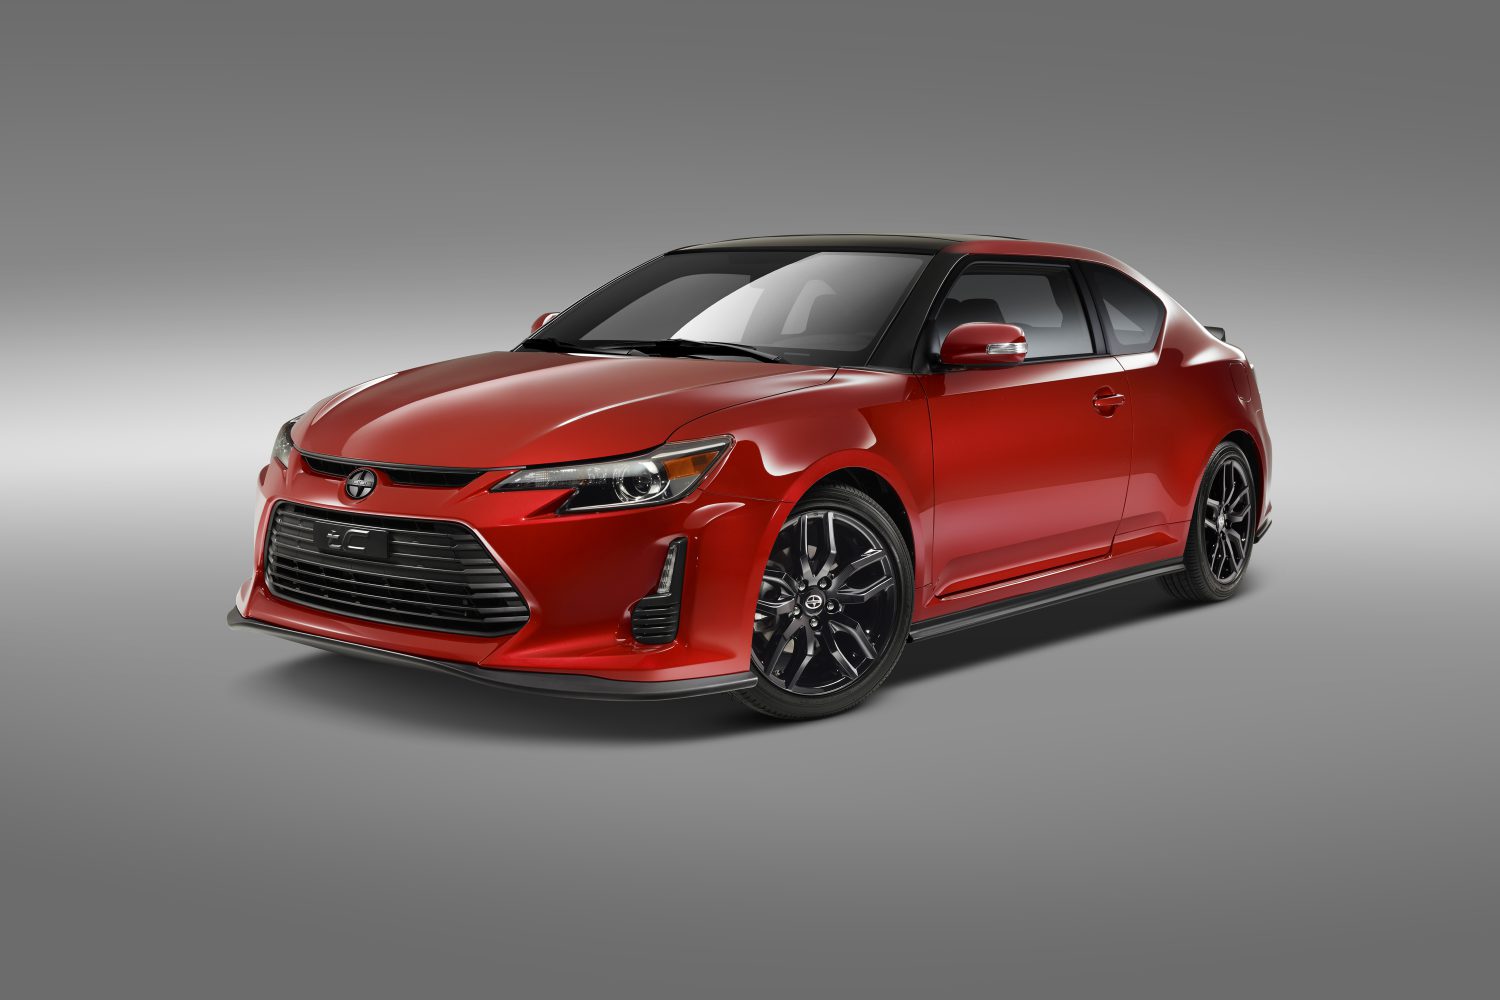 Scion-ara Celebration at New York International Auto Show Includes  JDM-inspired tC Coupe and Classic Concepts - Toyota USA Newsroom